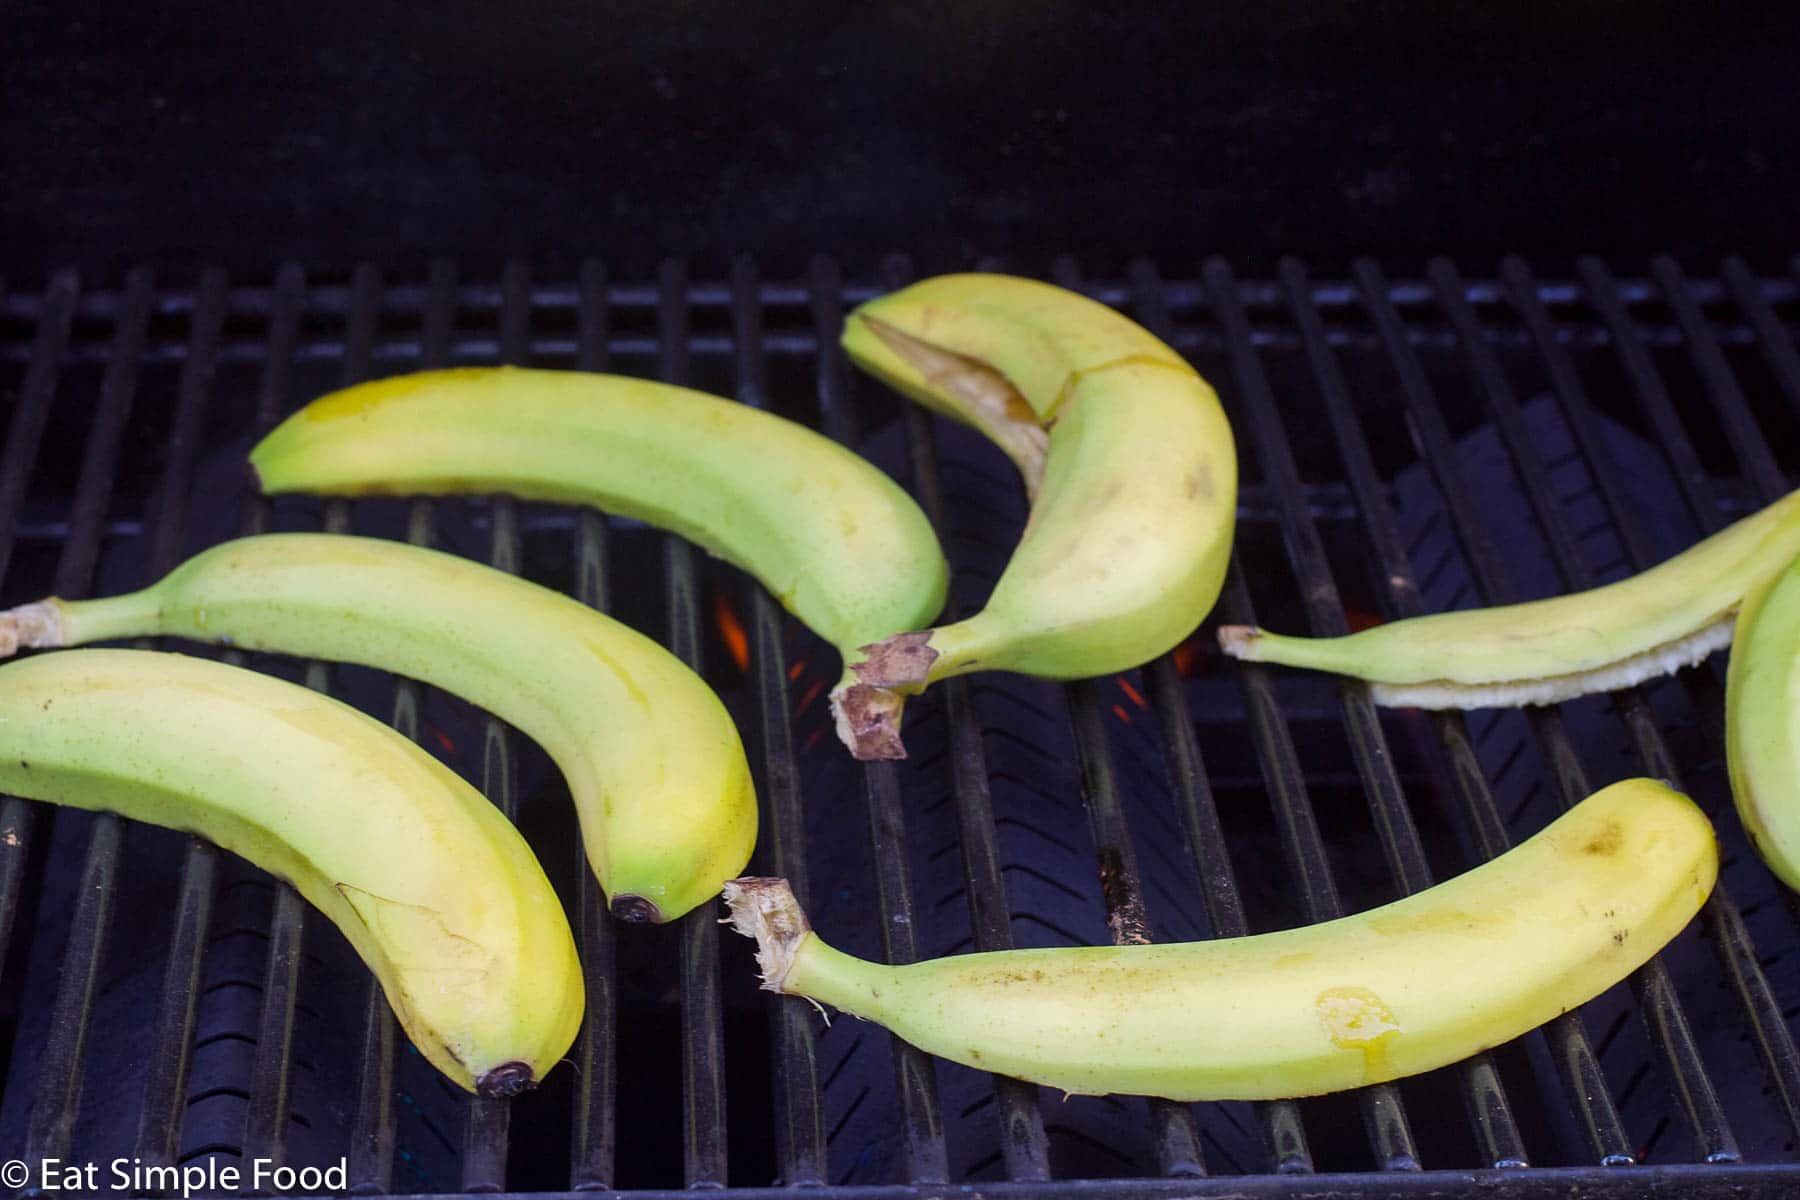 4 halved raw bananas with the peel on and one whole bananas on the grill starting to cook.